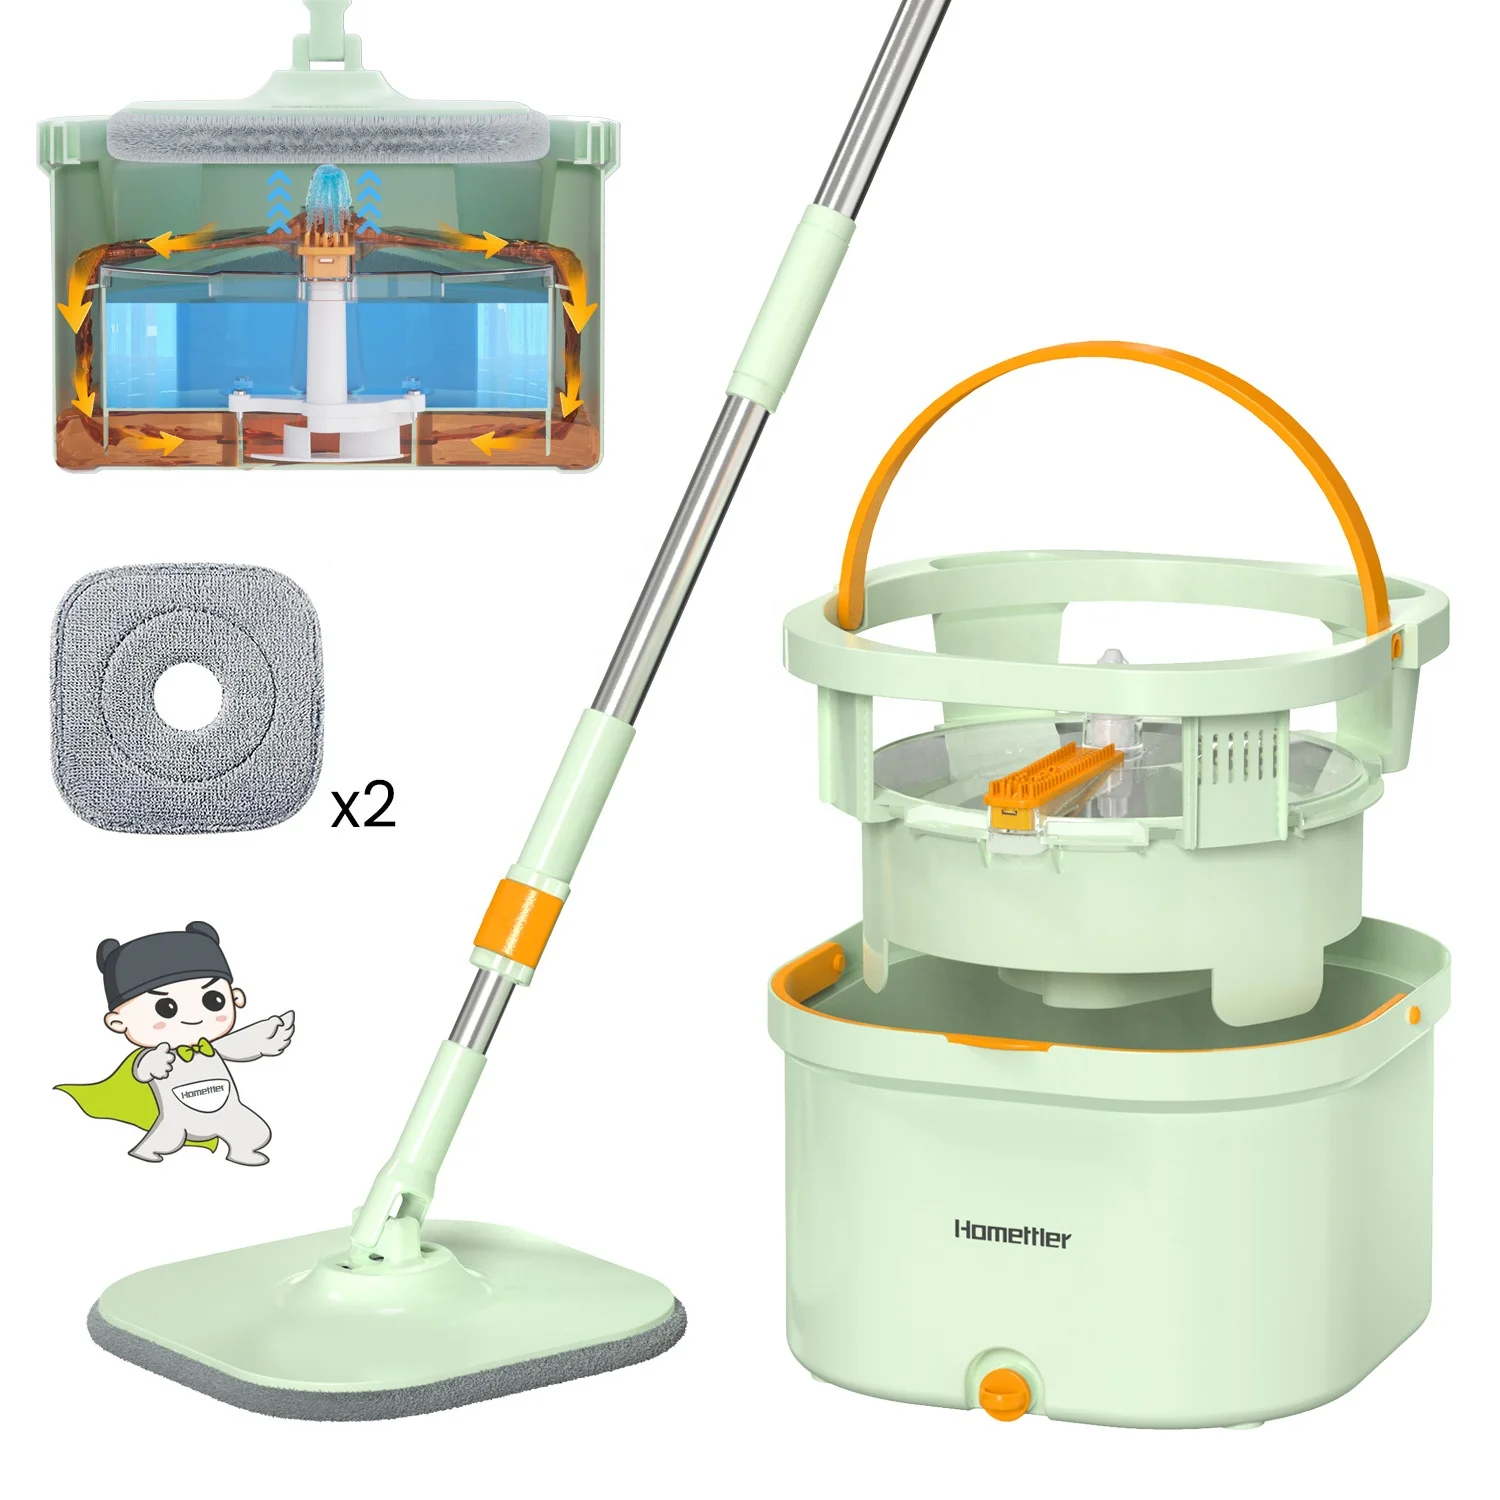 Homettler CoolMop Hot selling Clean Water Flat Spin Mop Hands free Mop Revome All Floor Hairs Self Cleaning Without Hand Wash (1600906265025)